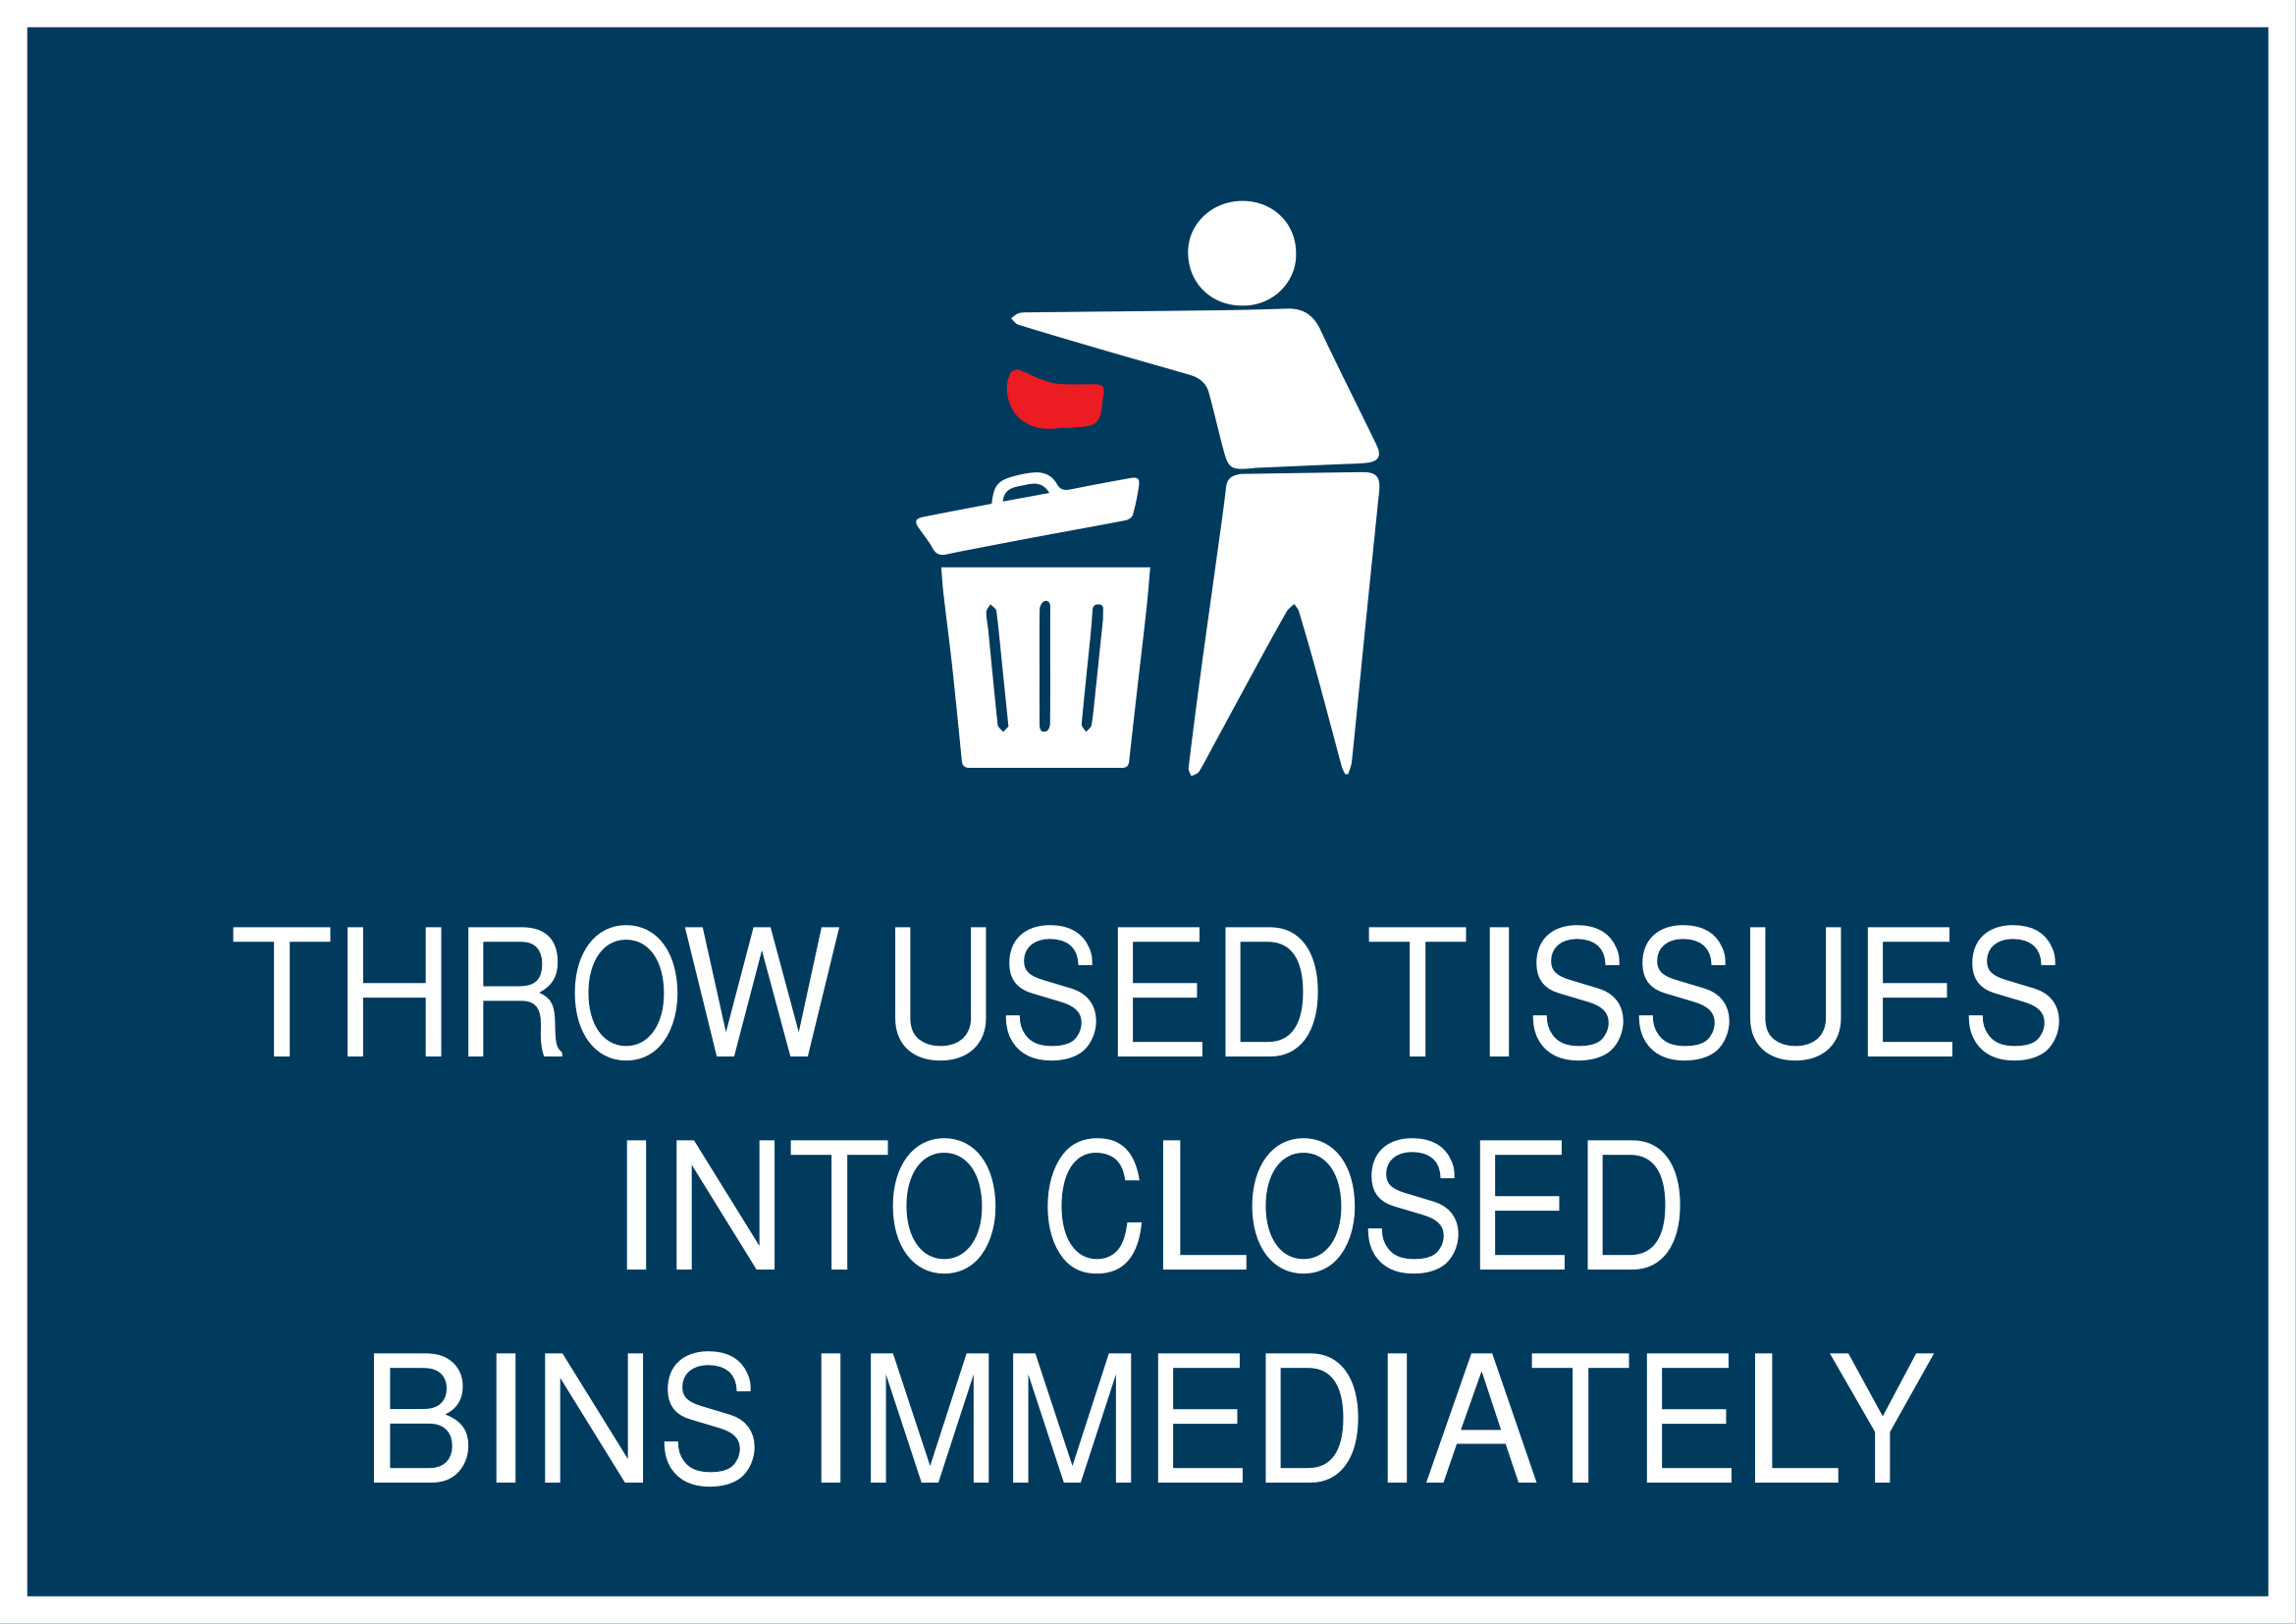 SHTK-Signage - Throw Used tissues into cloesed bins